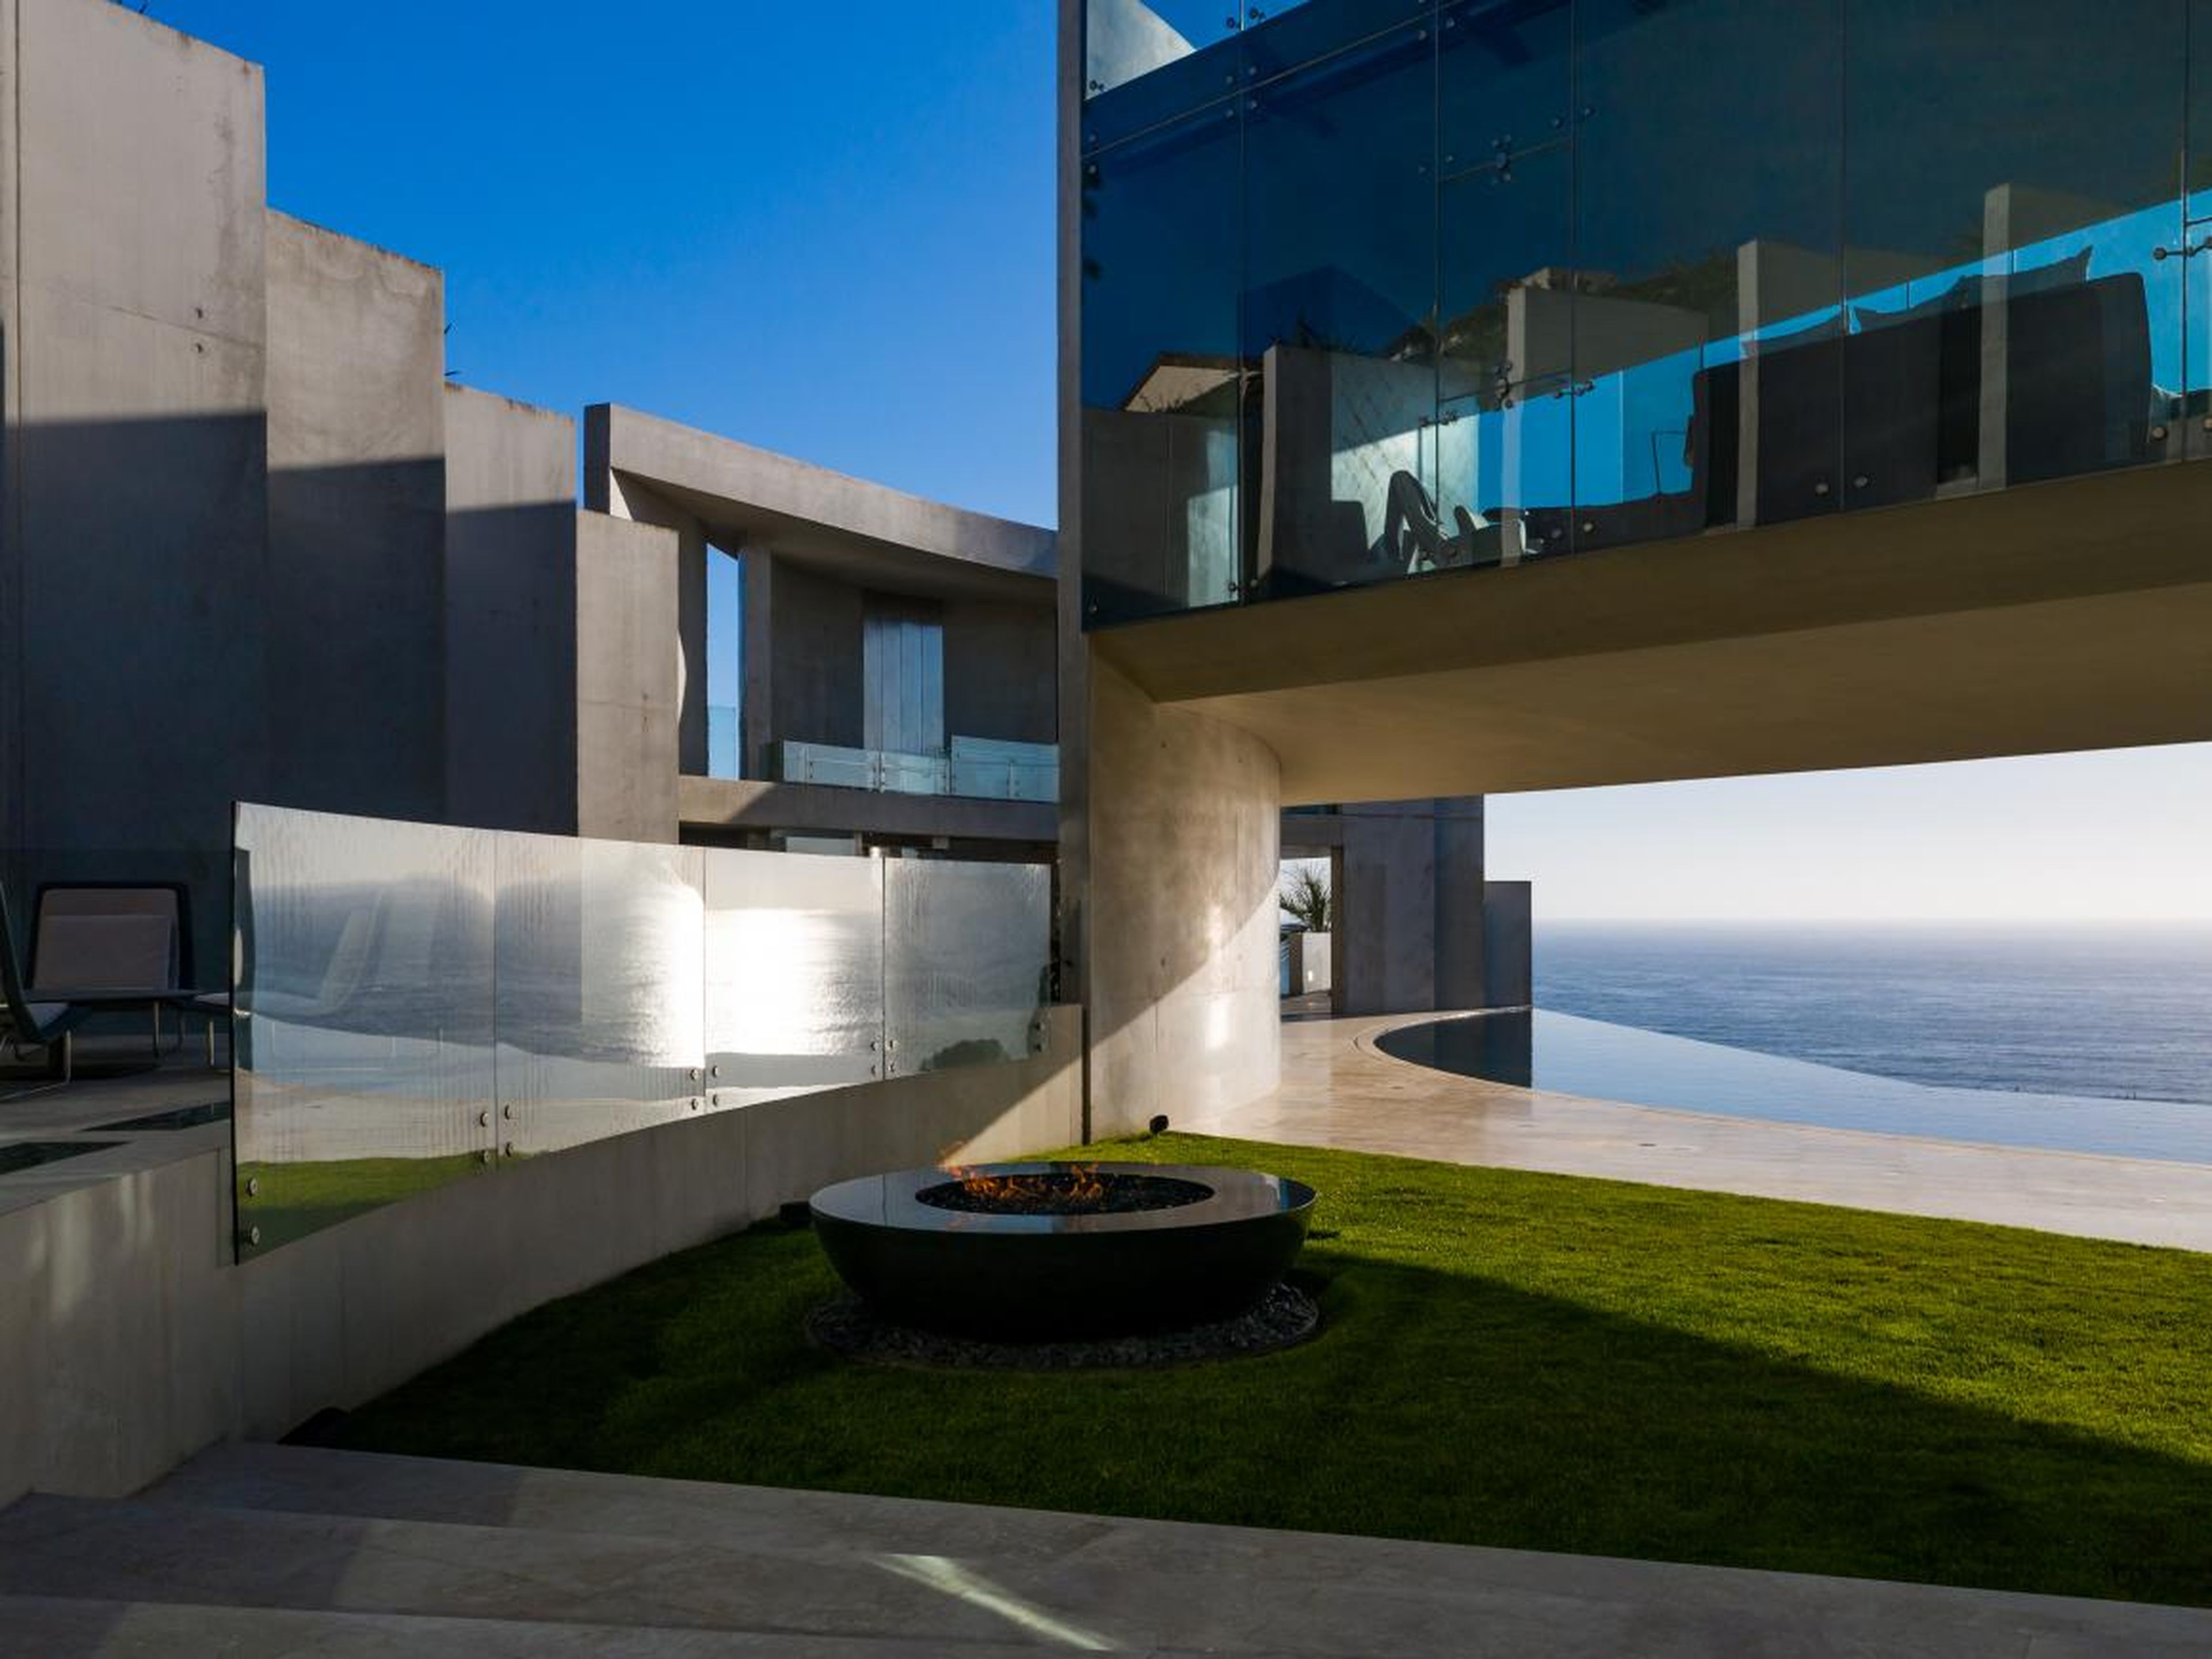 Nicknamed "The Razor House," the home was designed by San Diego architect Wallace E. Cunningham.